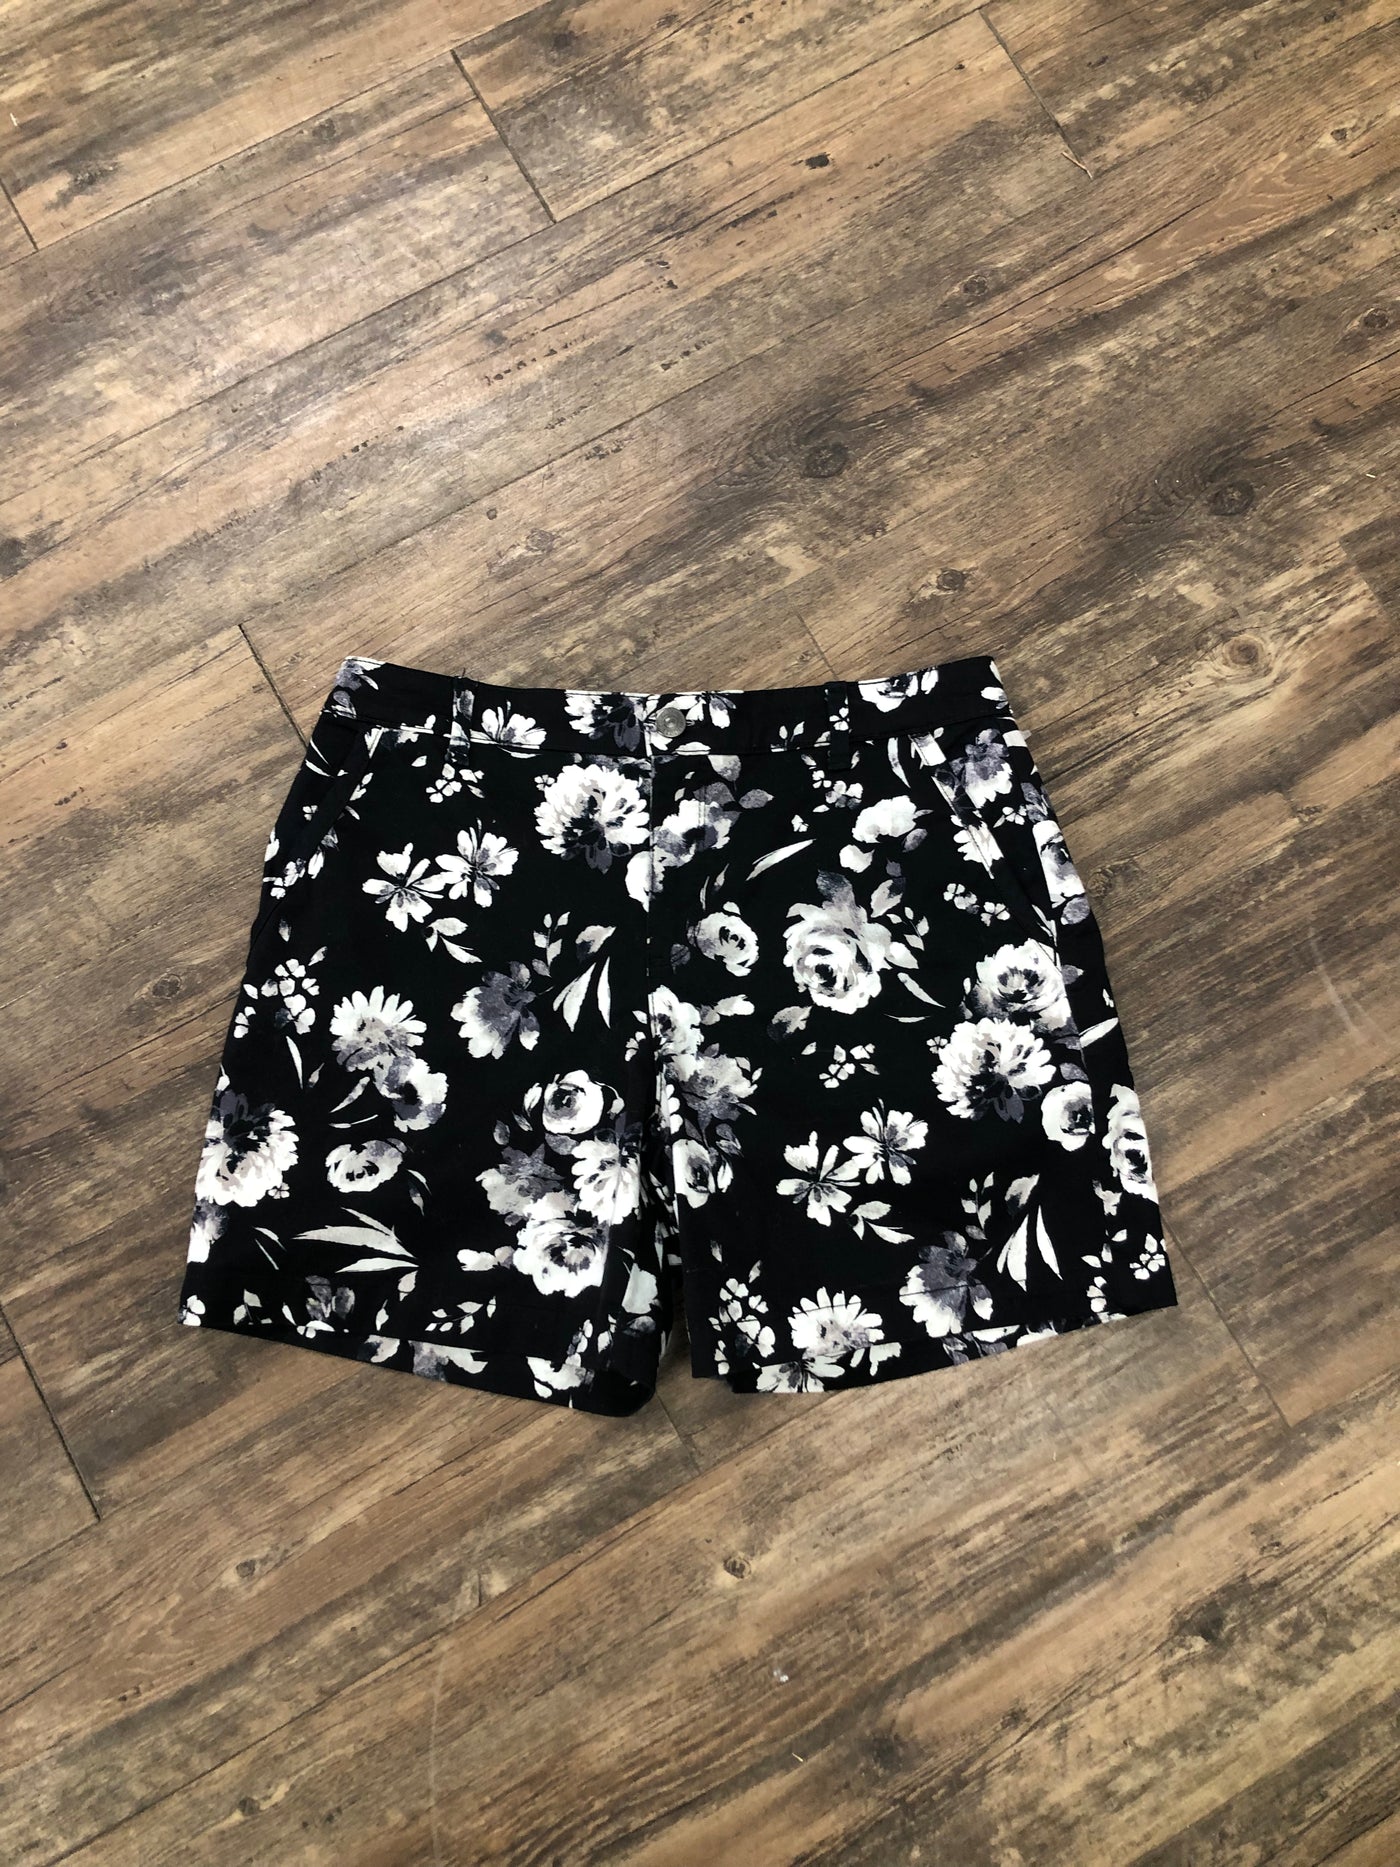 Black and white floral shorts